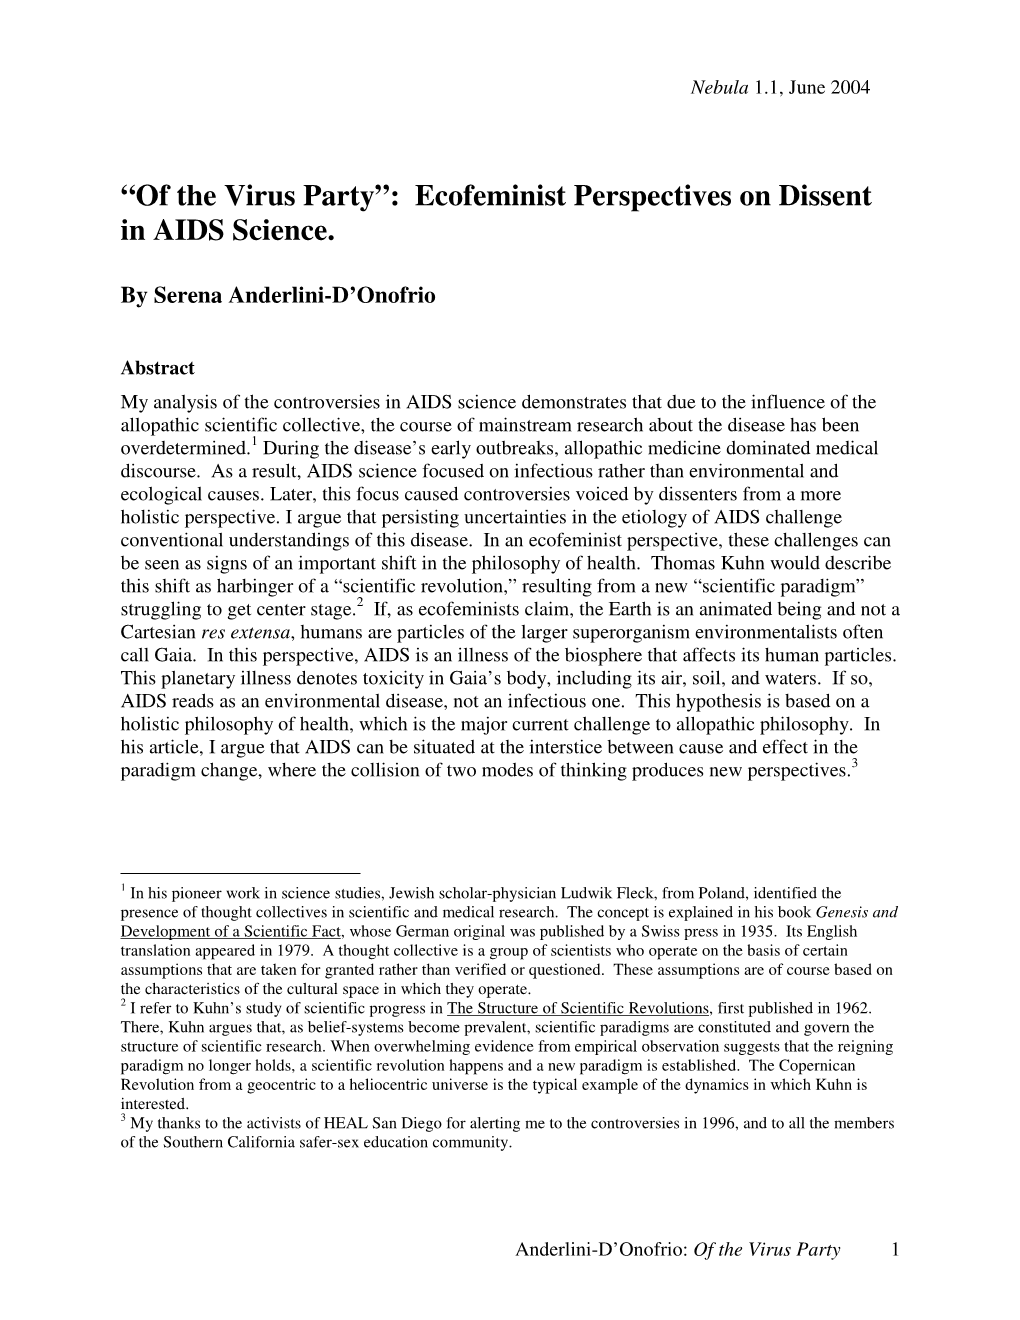 “Of the Virus Party”: Ecofeminist Perspectives on Dissent in AIDS Science